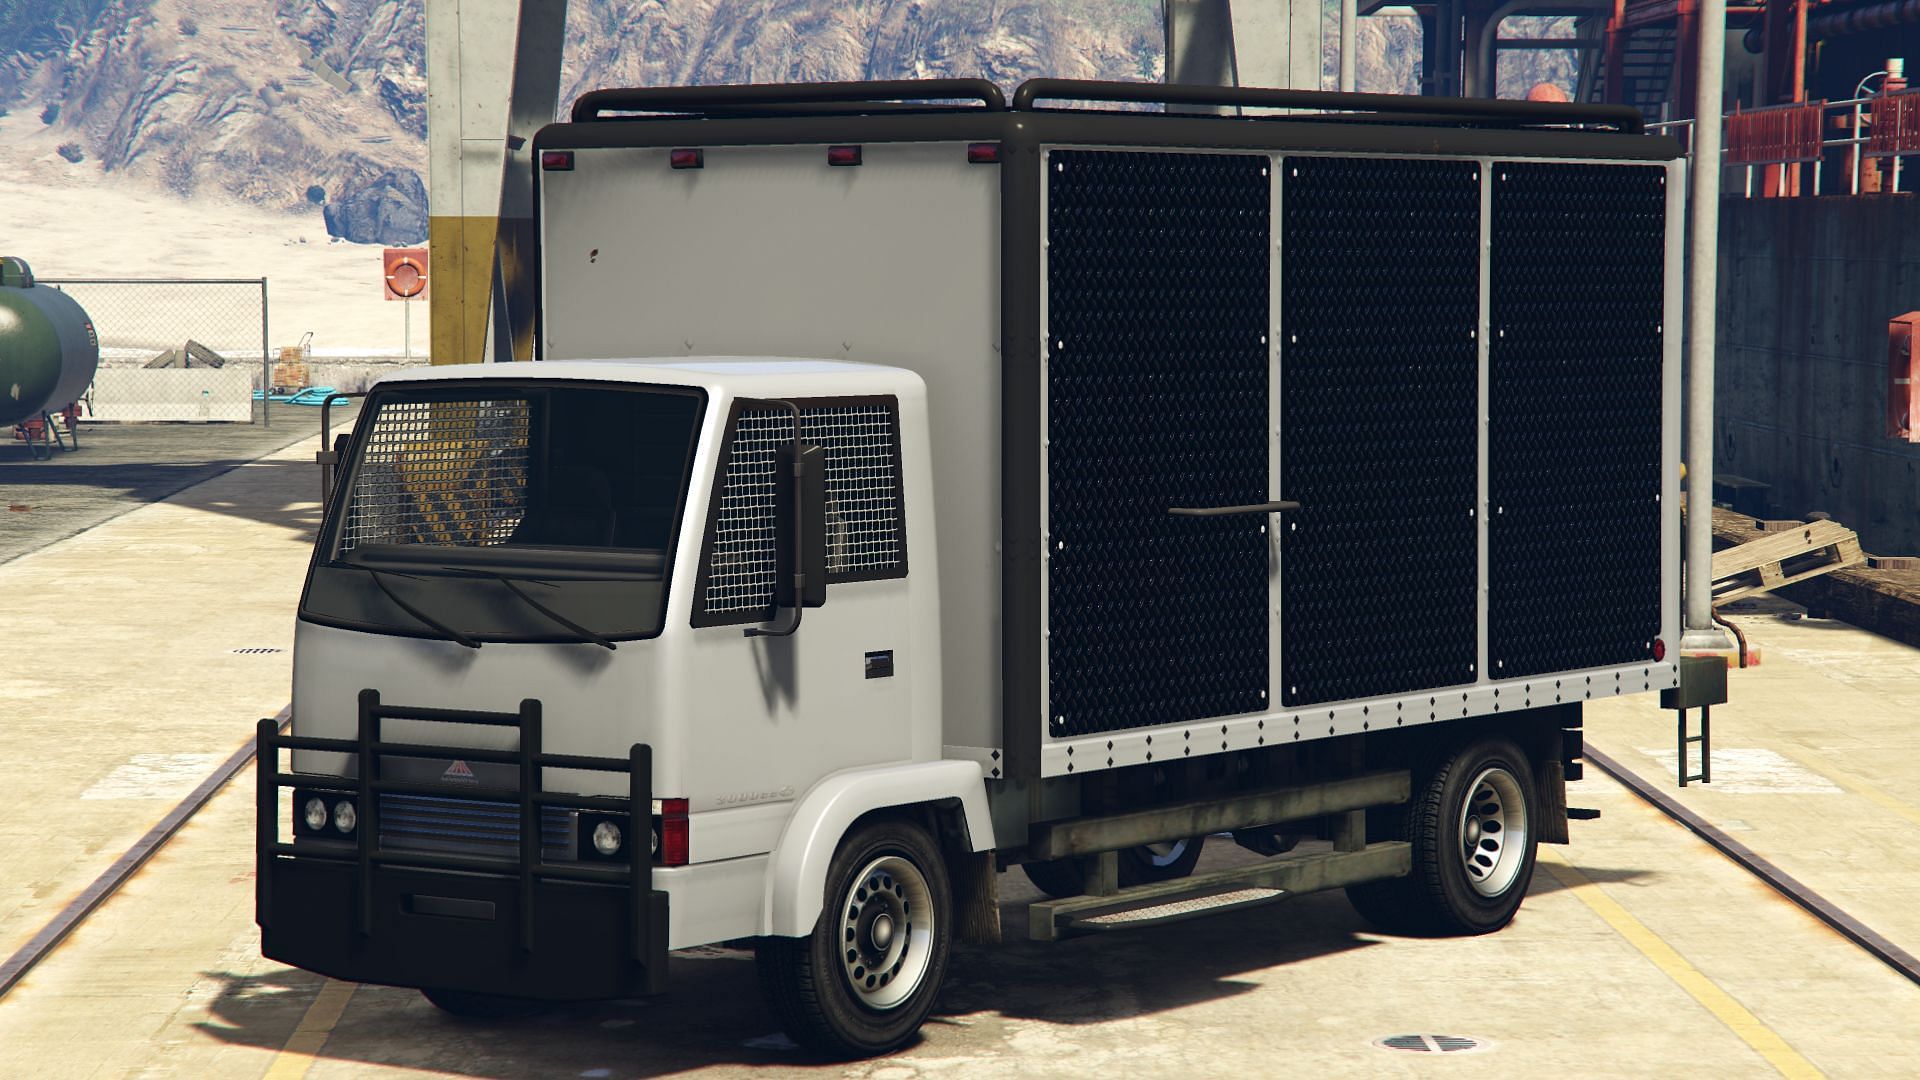 GTA Online games looking to seriously grind money can benefit from this (Image via GTA WiKi)